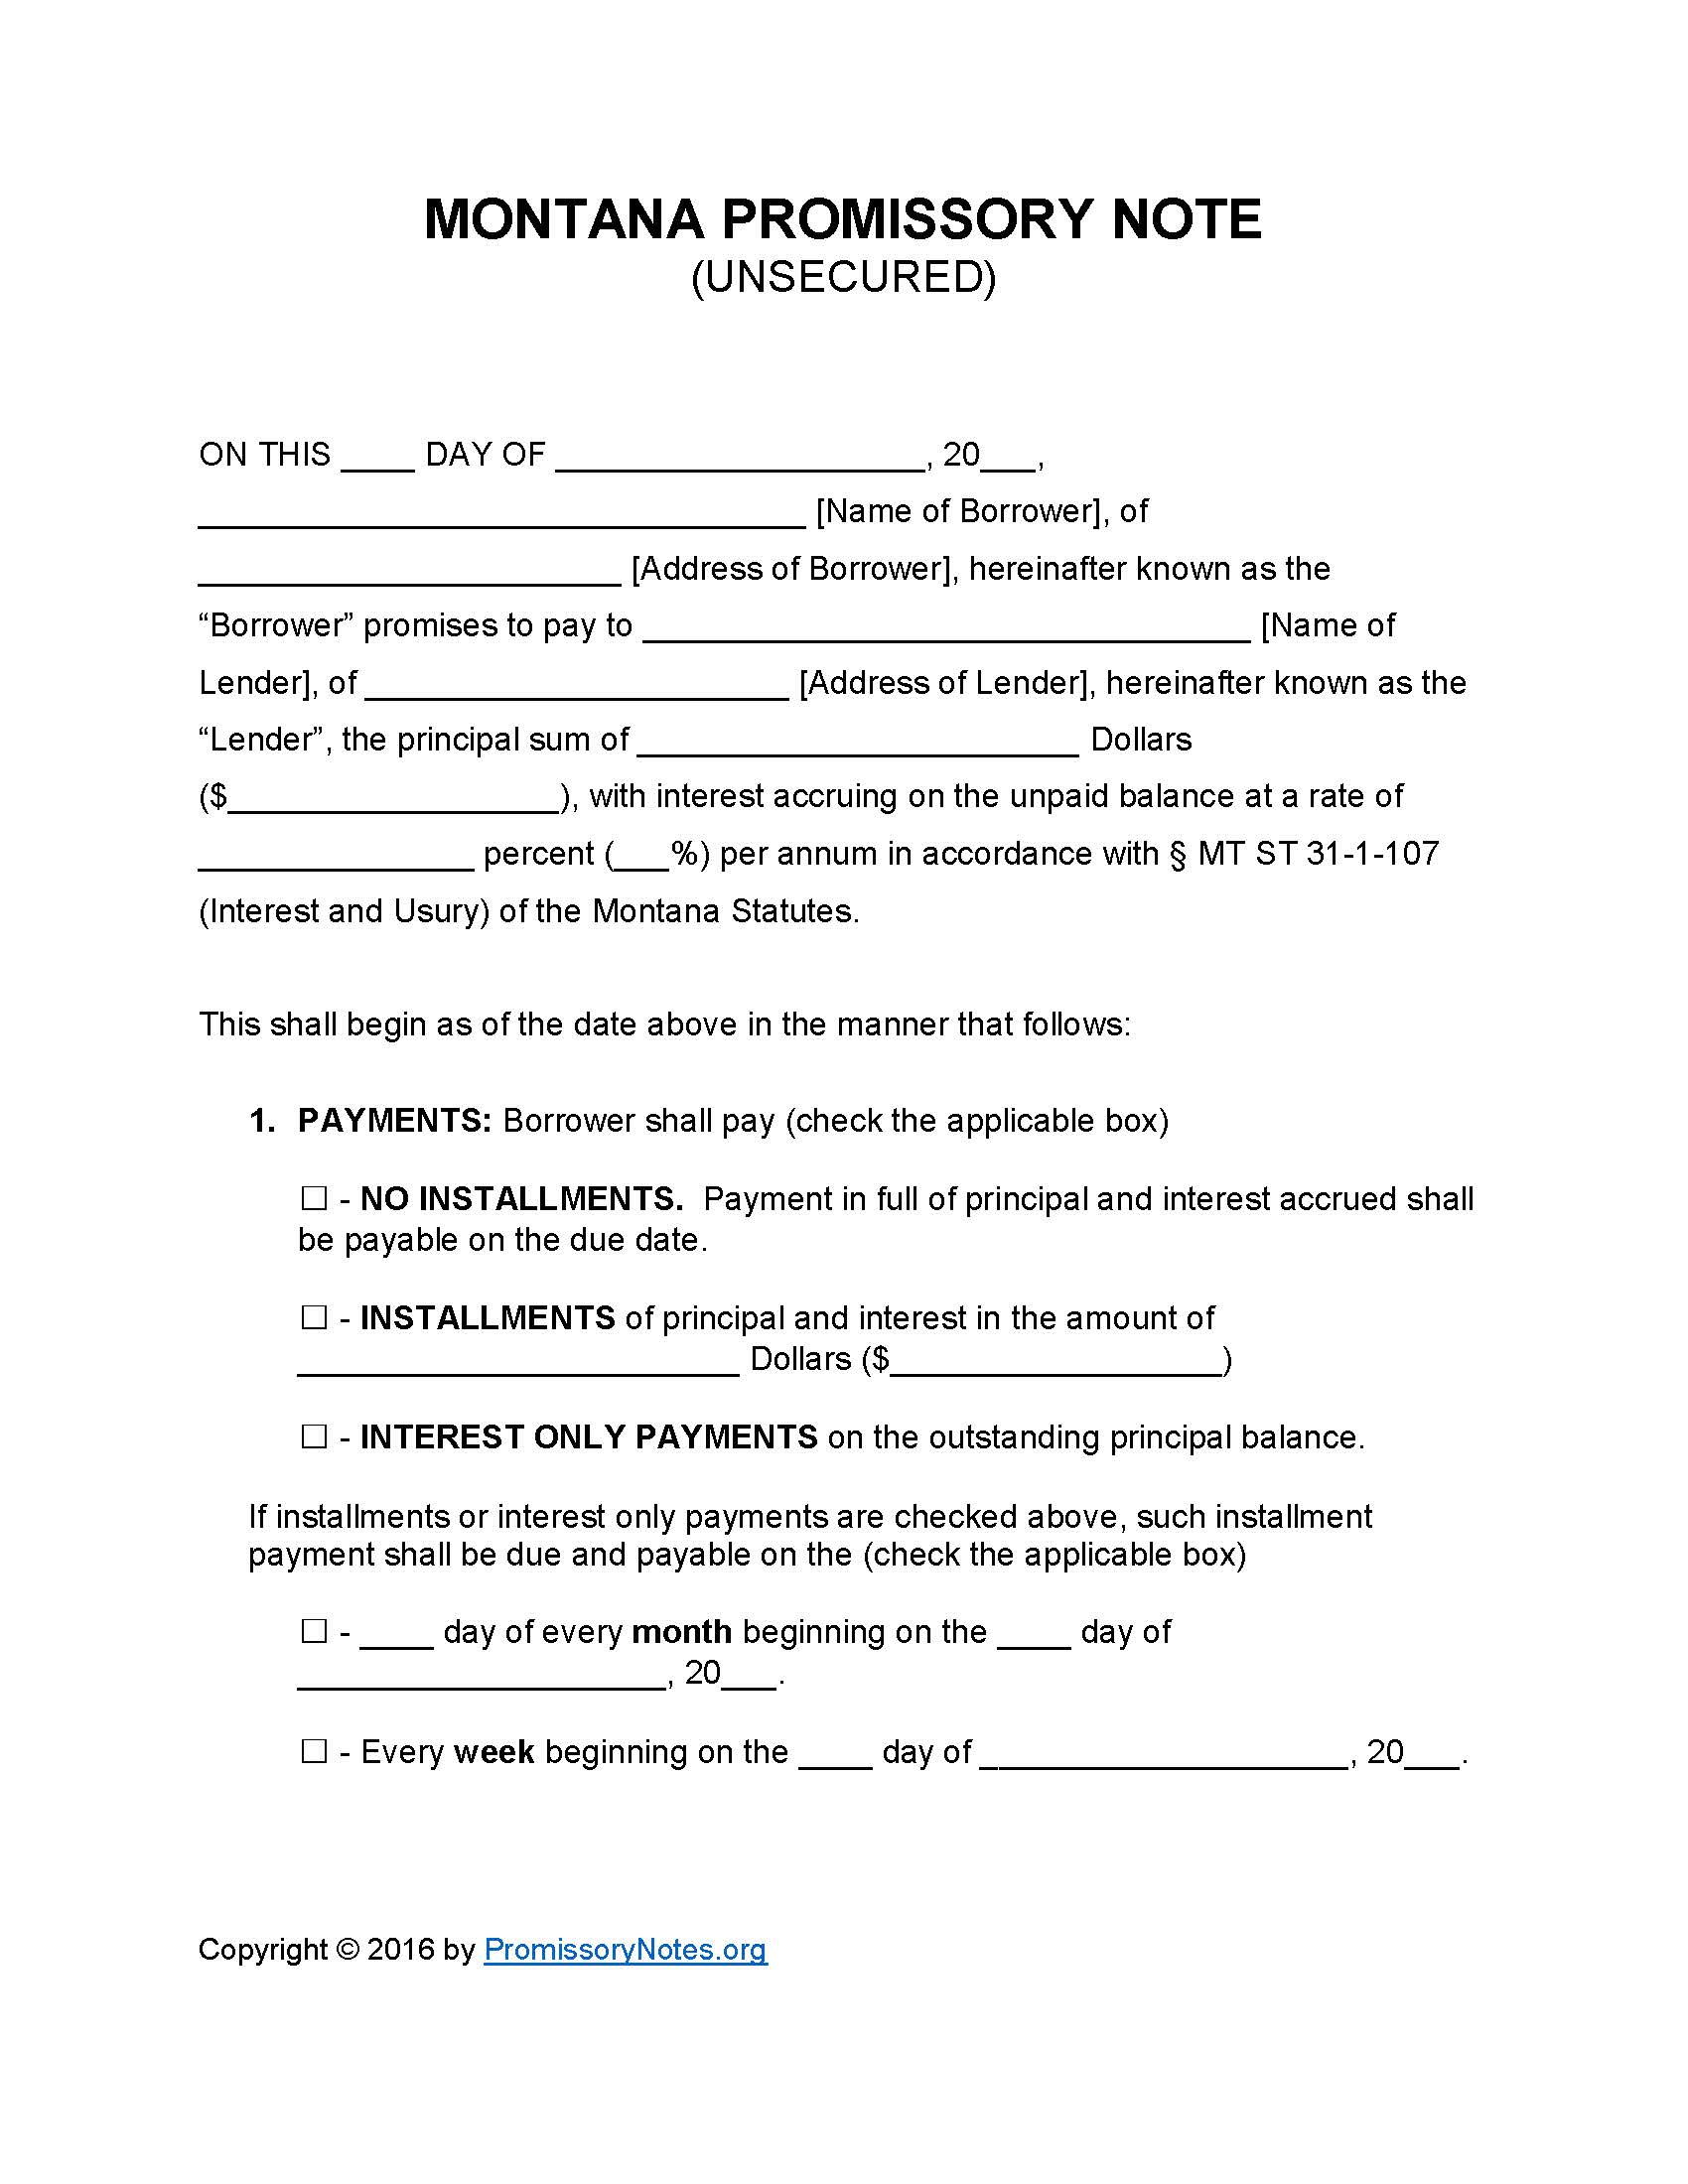 montana-unsecured-promissory-note-form